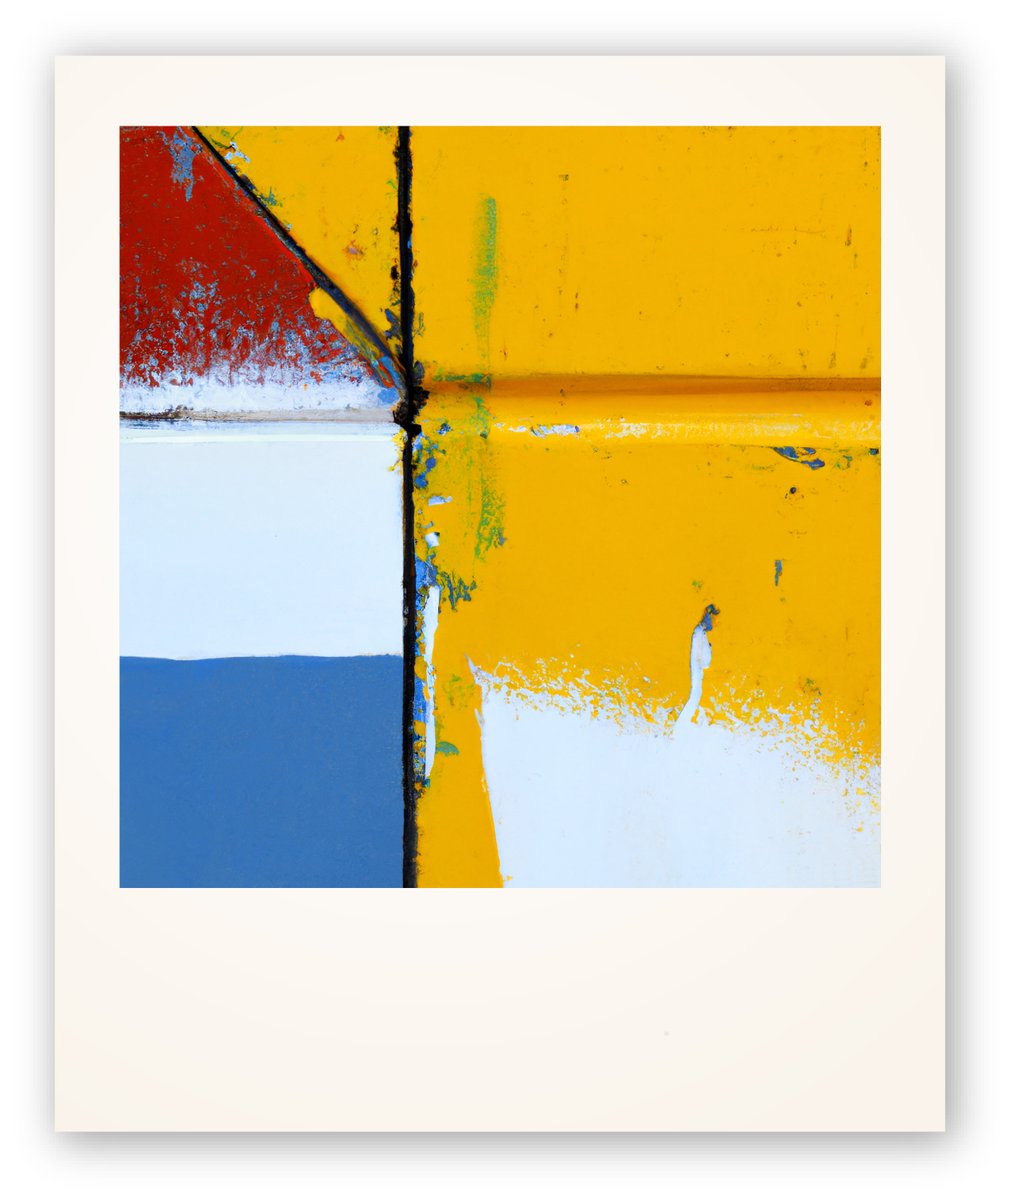 Urban Abstracts in my Polaroids revisited series.    

'Finding Mondrian'